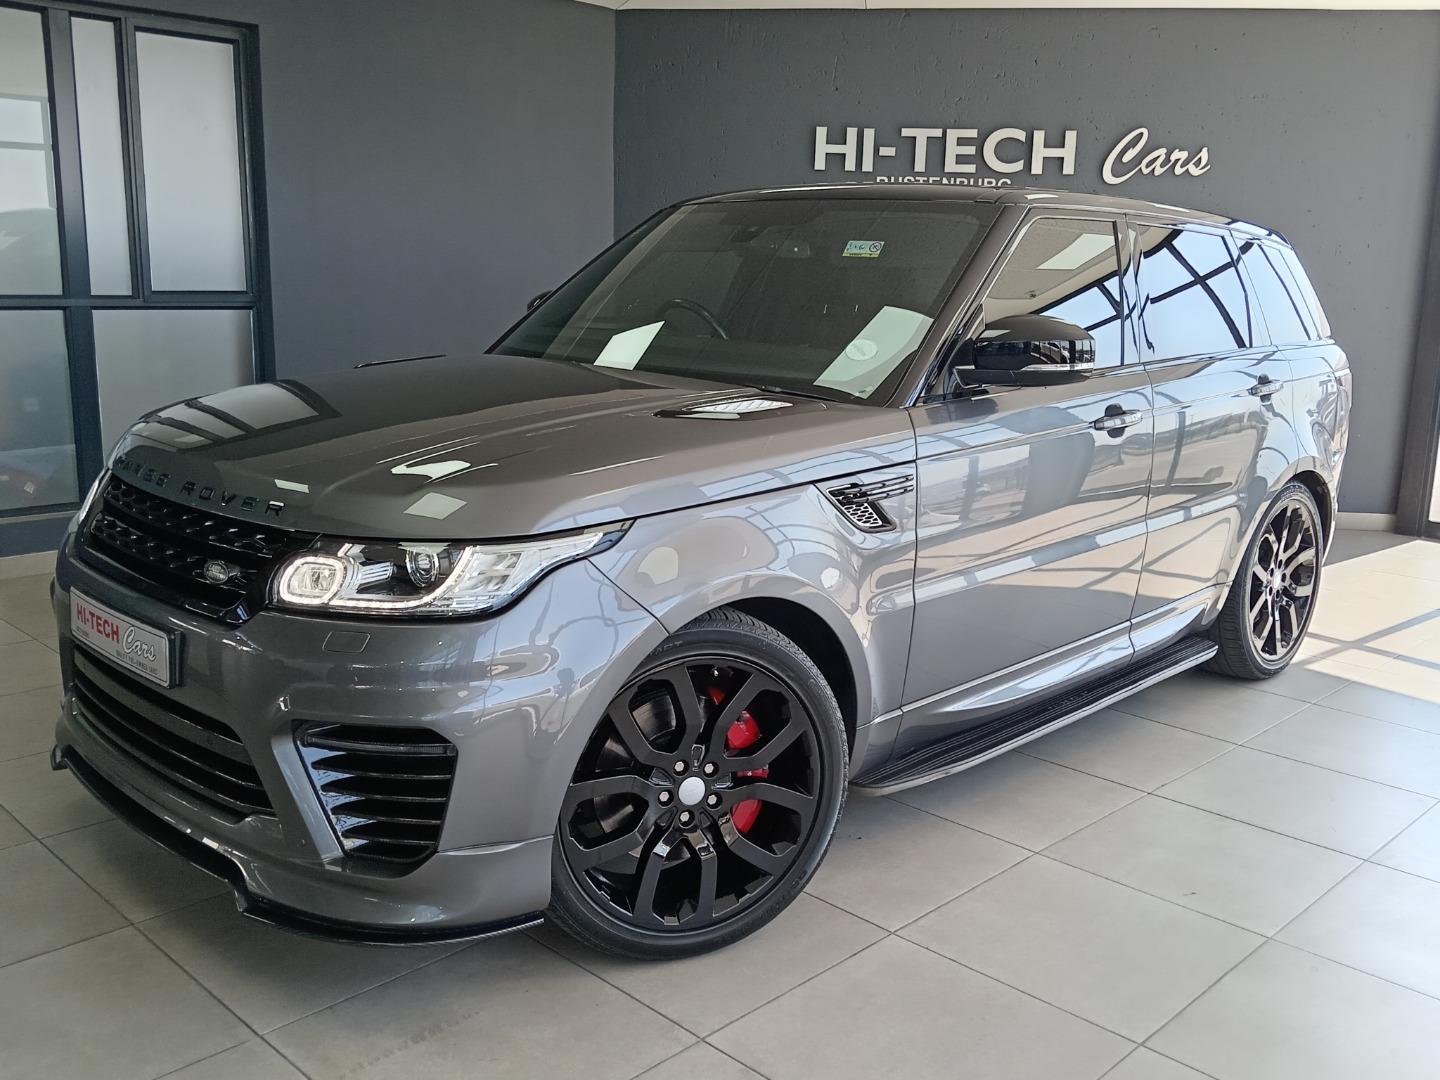 2016 LAND ROVER RANGE ROVER SPORT Hse dynamic supercharged